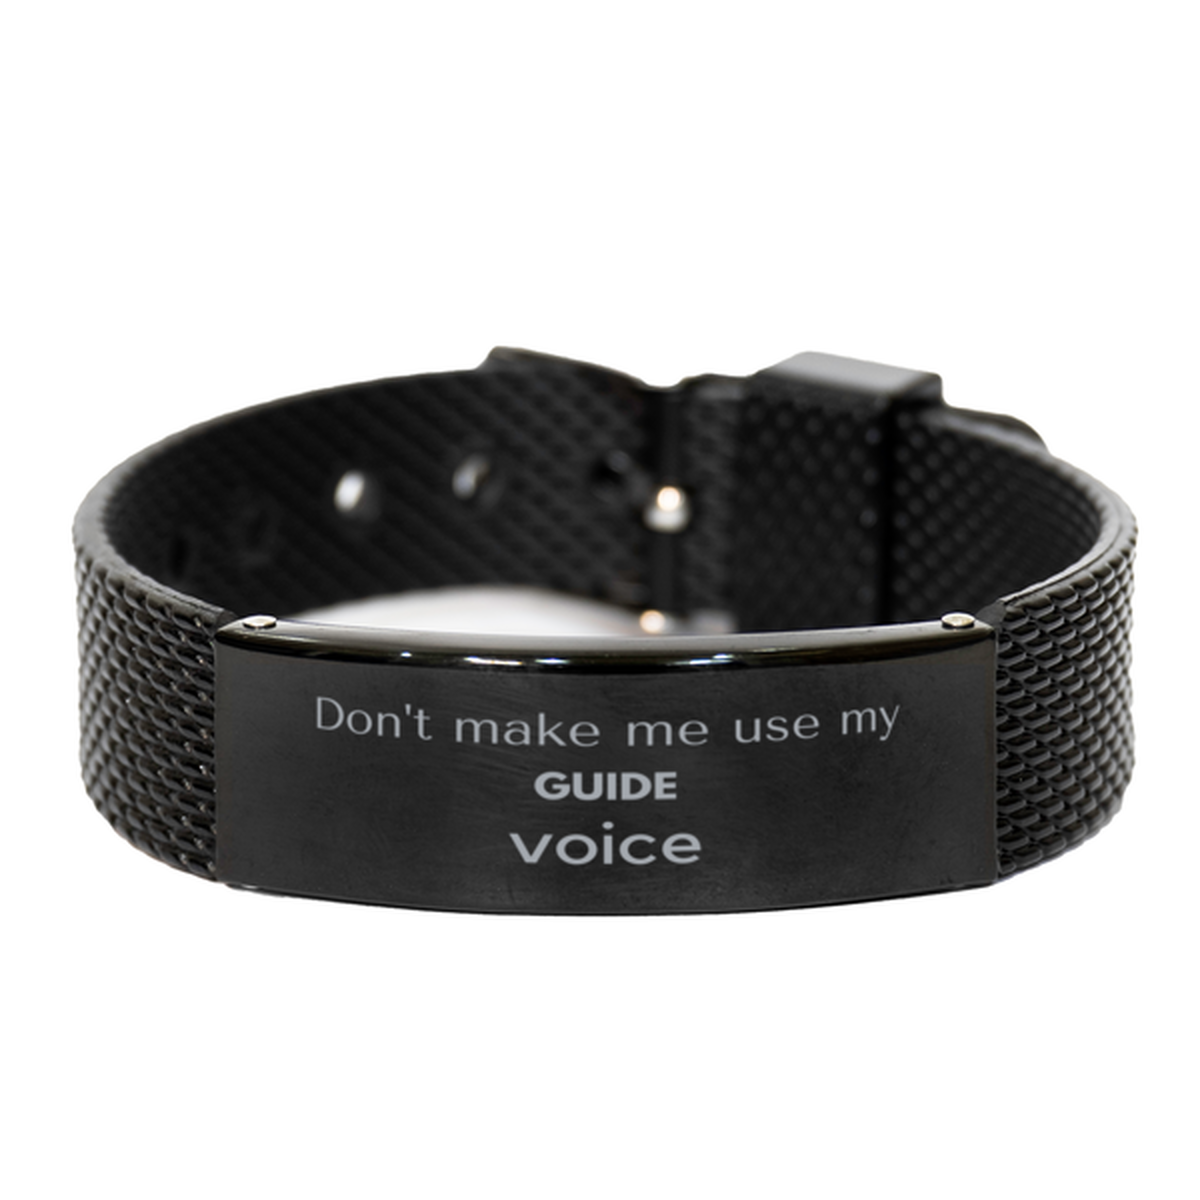 Don't make me use my Guide voice, Sarcasm Guide Gifts, Christmas Guide Black Shark Mesh Bracelet Birthday Unique Gifts For Guide Coworkers, Men, Women, Colleague, Friends